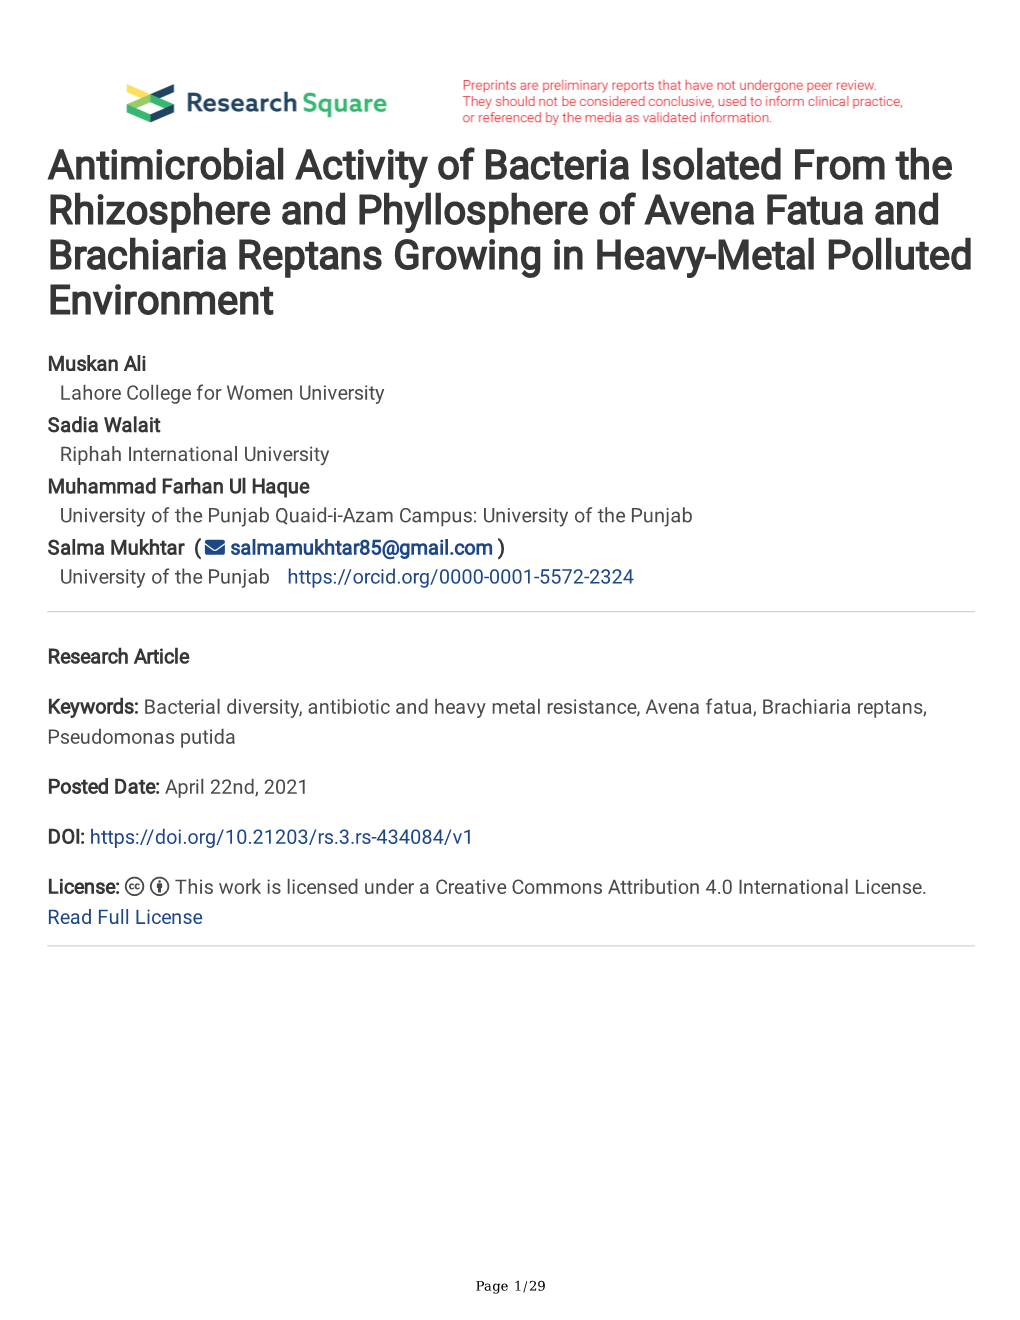 Antimicrobial Activity of Bacteria Isolated from the Rhizosphere and Phyllosphere of Avena Fatua and Brachiaria Reptans Growing in Heavy-Metal Polluted Environment